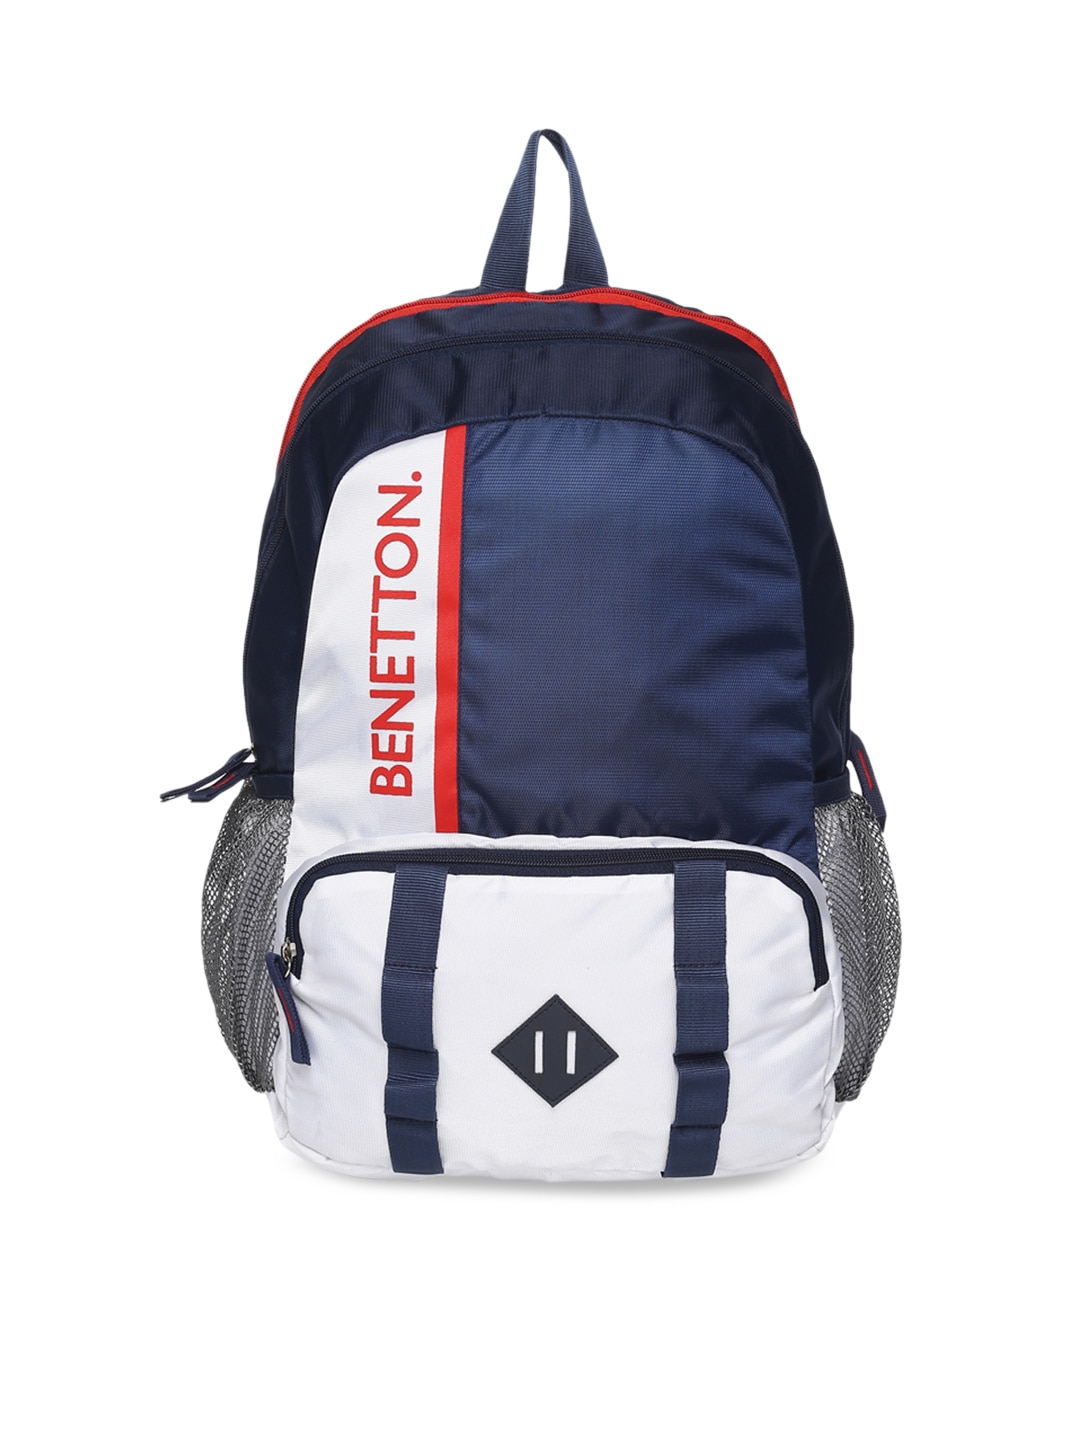 United Colors of Benetton Unisex Navy Blue & White Solid Backpack Price in India